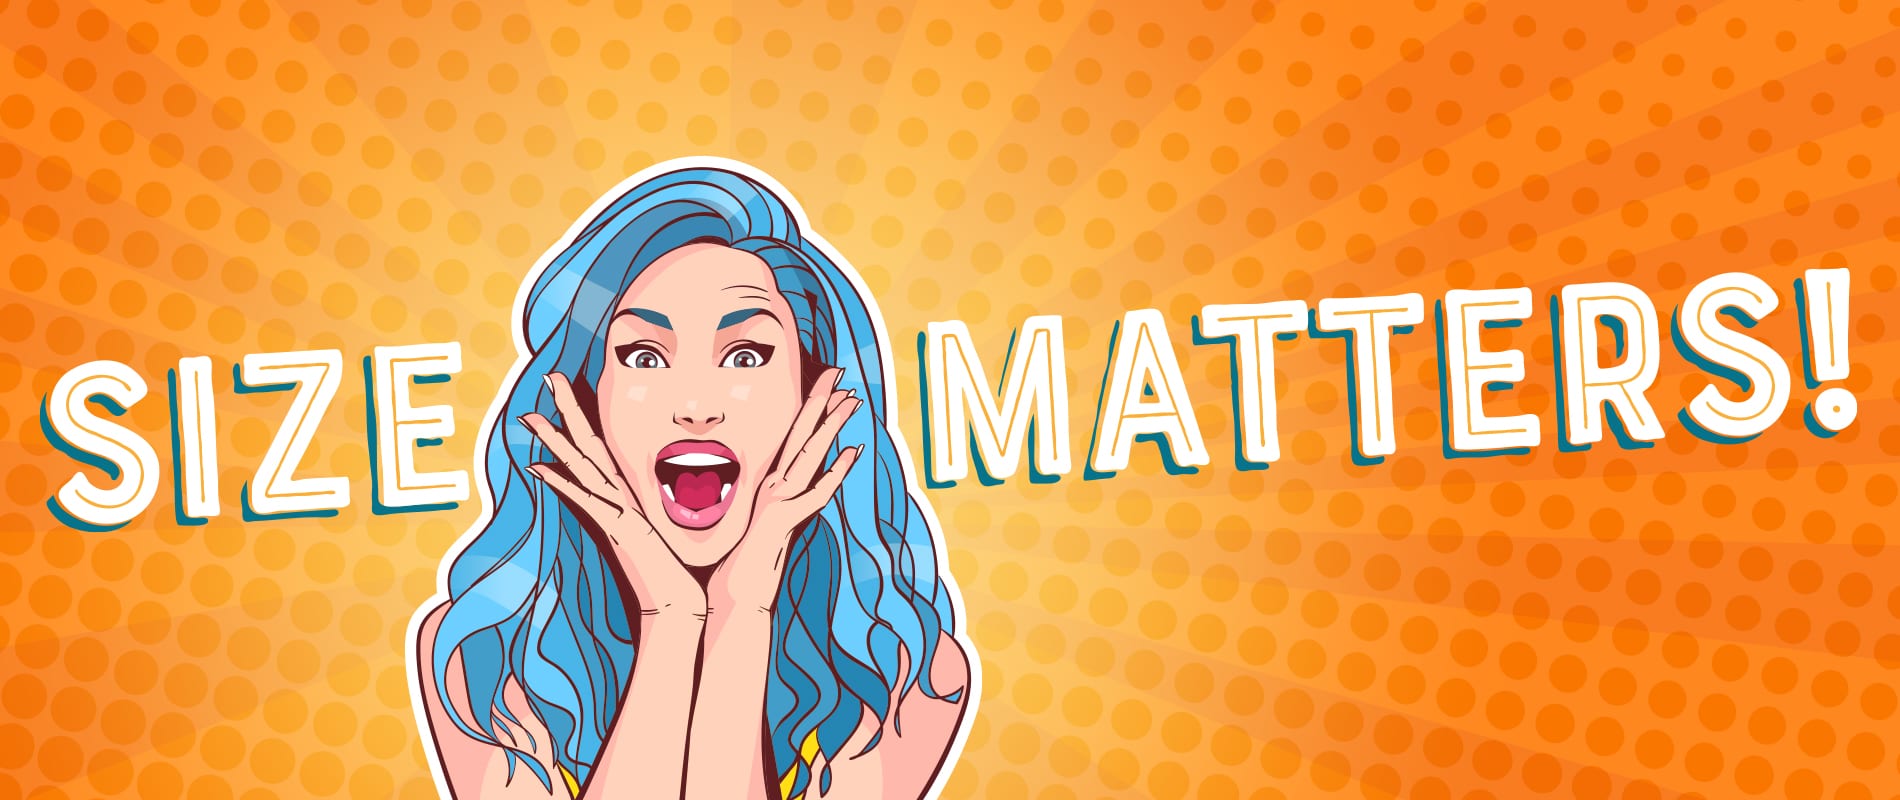 Illustration of a woman with blue hair looking shocked with large text behind stating 'Size matters!'